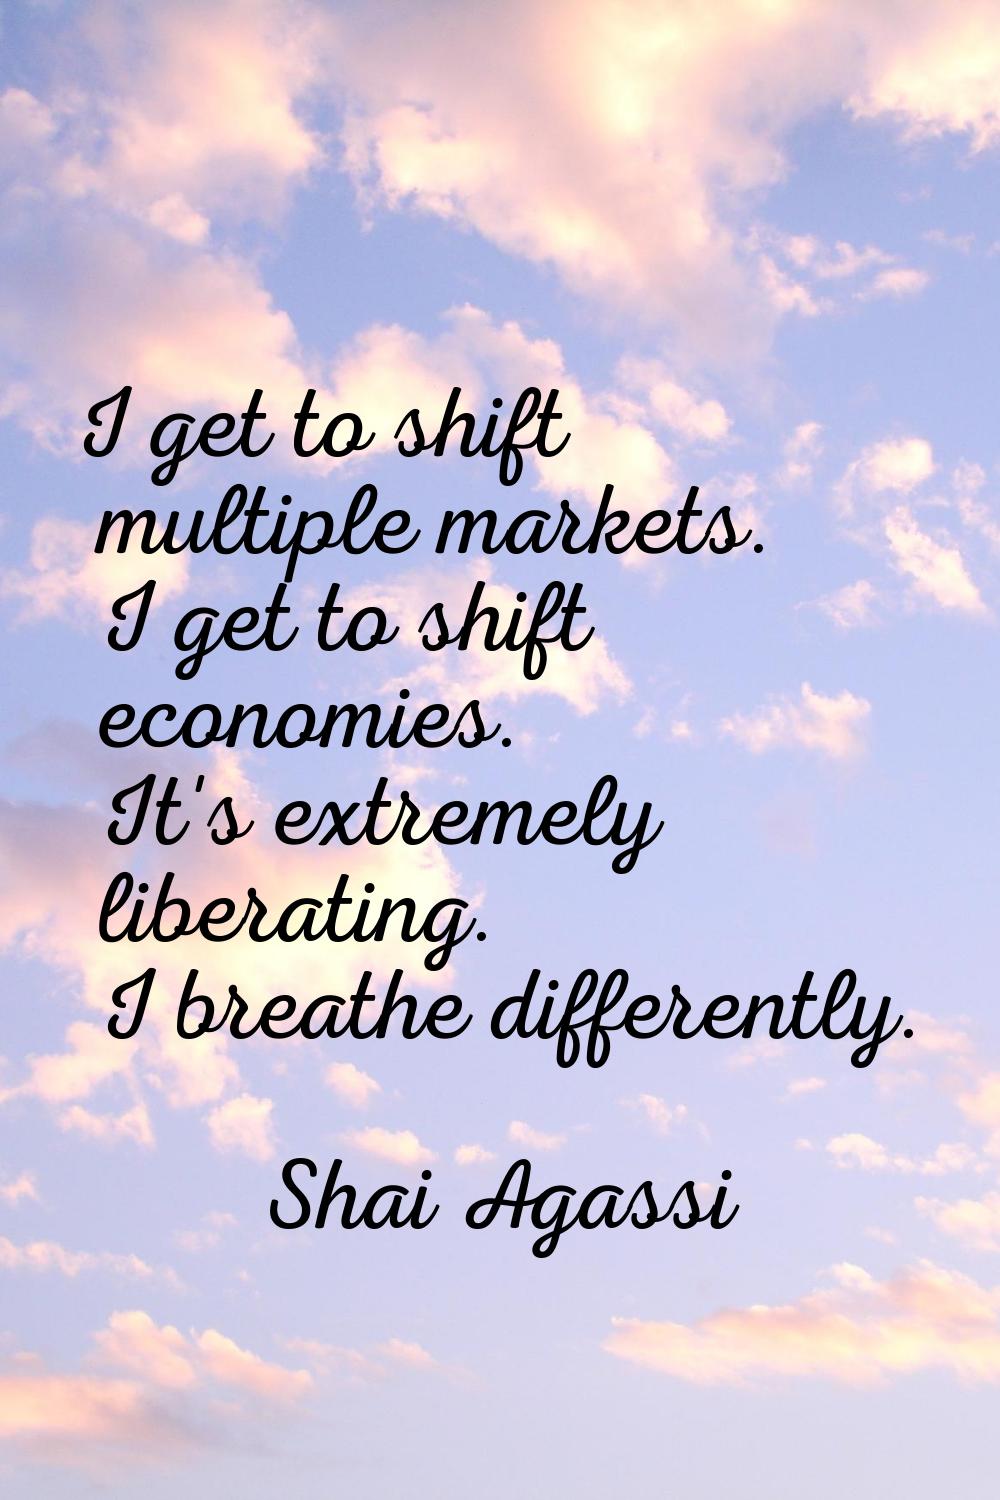 I get to shift multiple markets. I get to shift economies. It's extremely liberating. I breathe dif